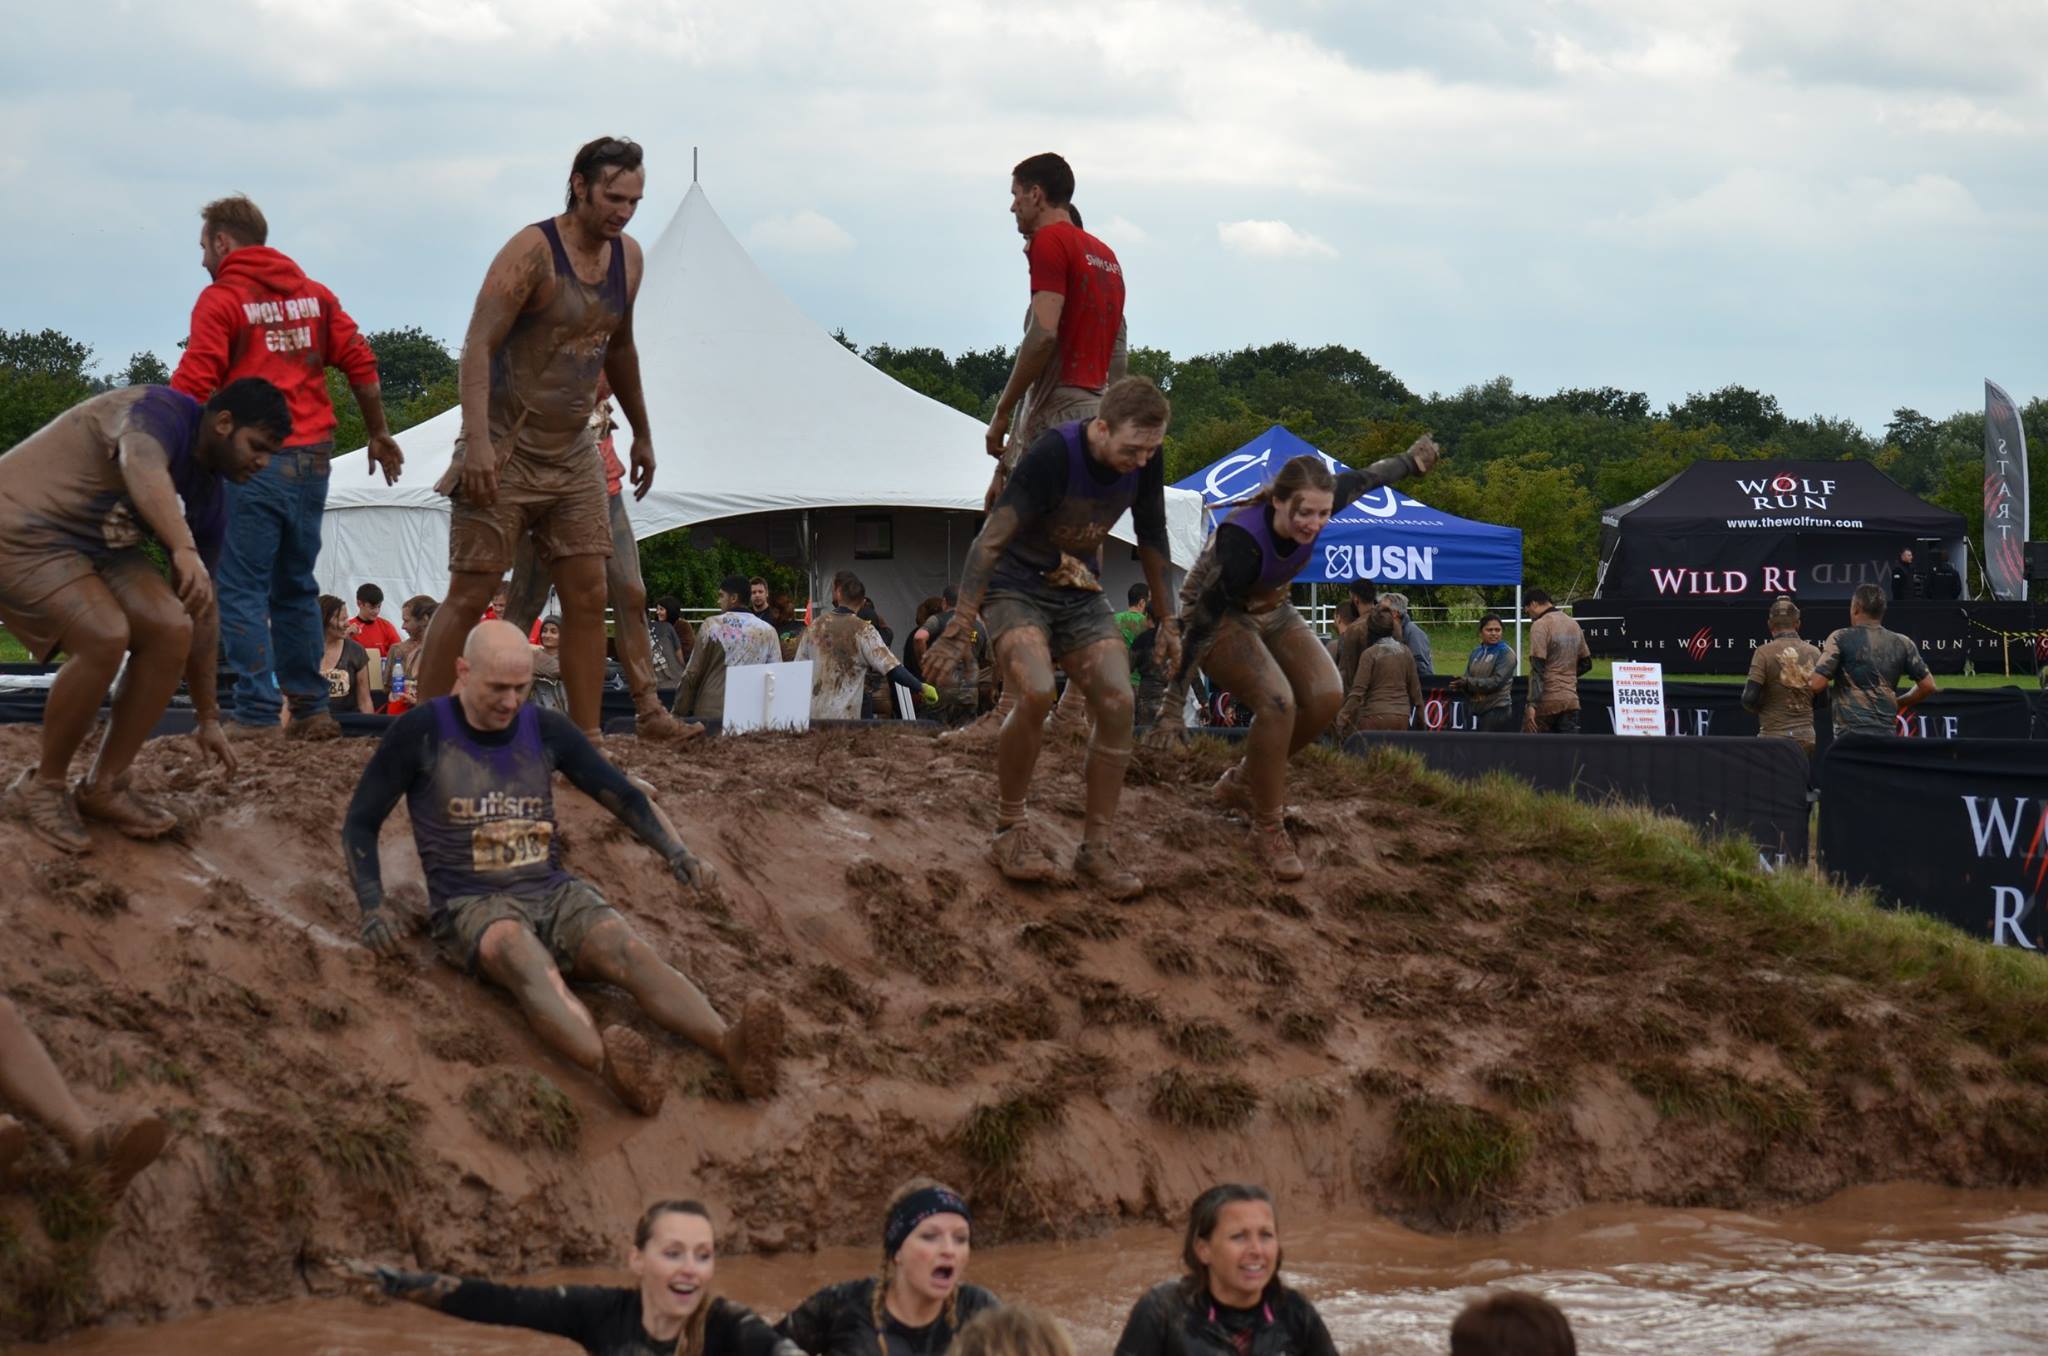 Supporting Autism West Midlands at the Wolf run